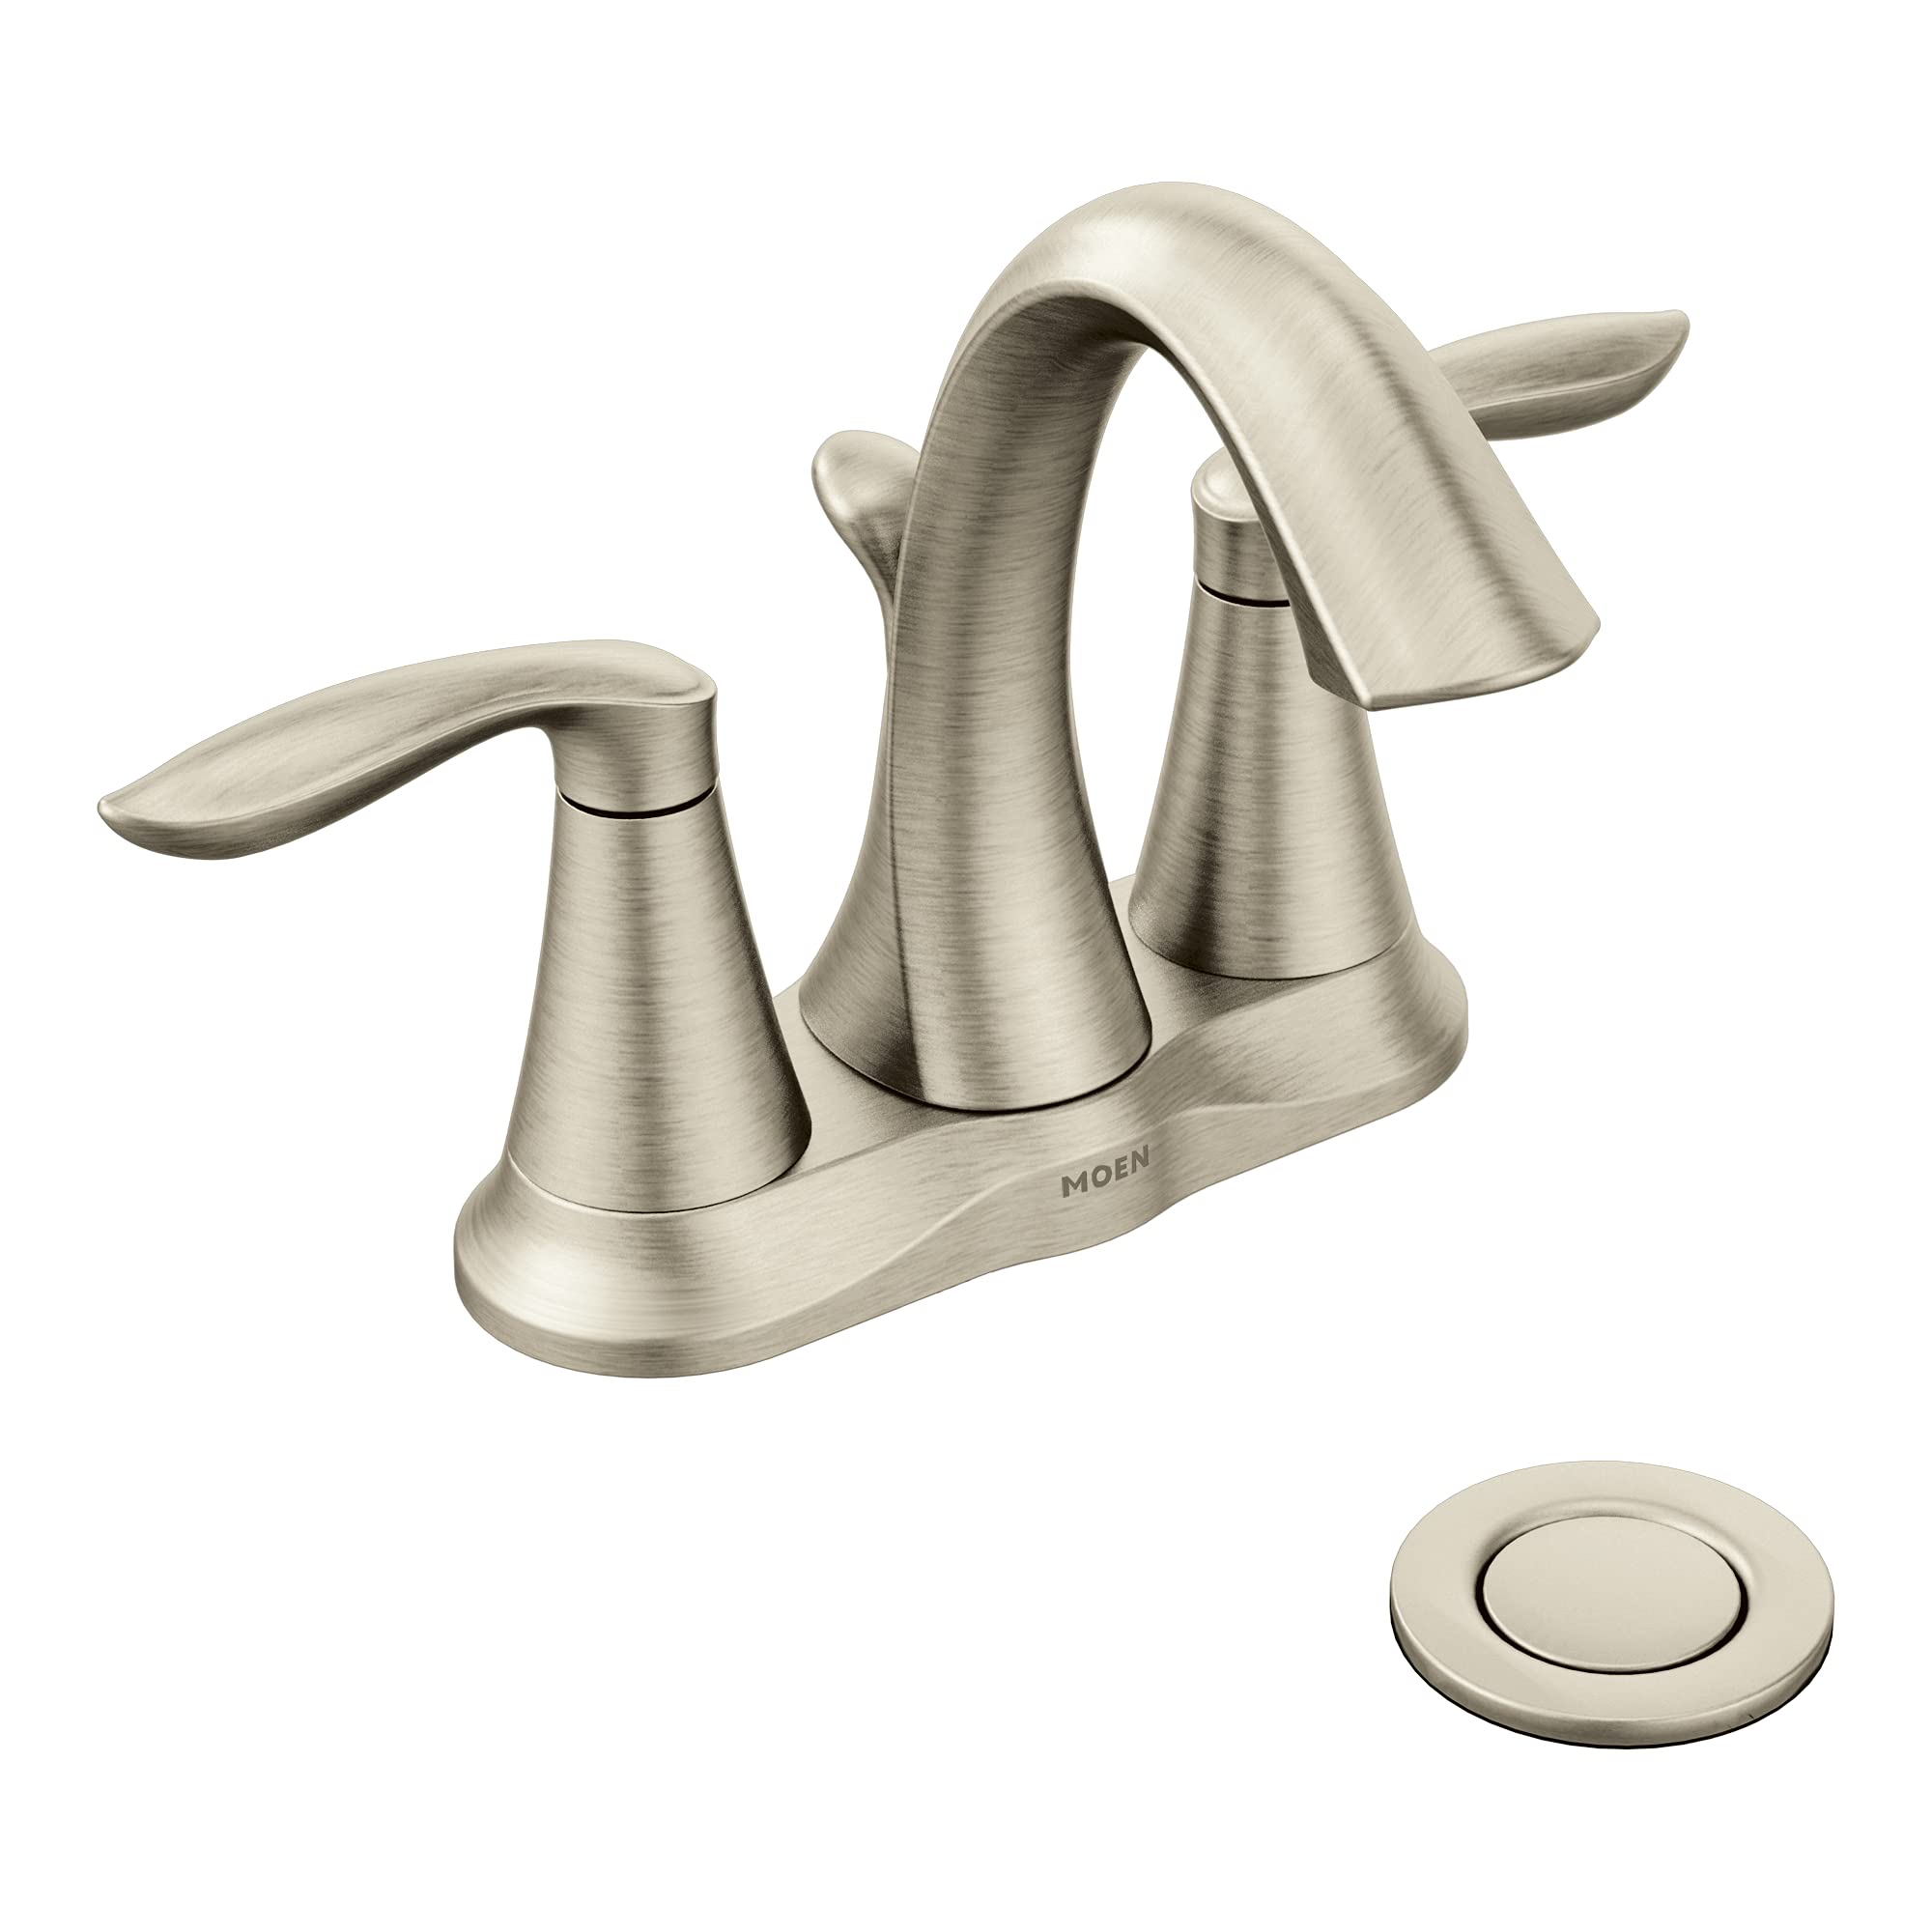 Moen Eva Brushed Nickel Two-Handle 4-Inch Centerset Bathroom Faucet with Drain Assembly, Bathroom Faucets for Sink 3-Hole, 6410BN, 0.5